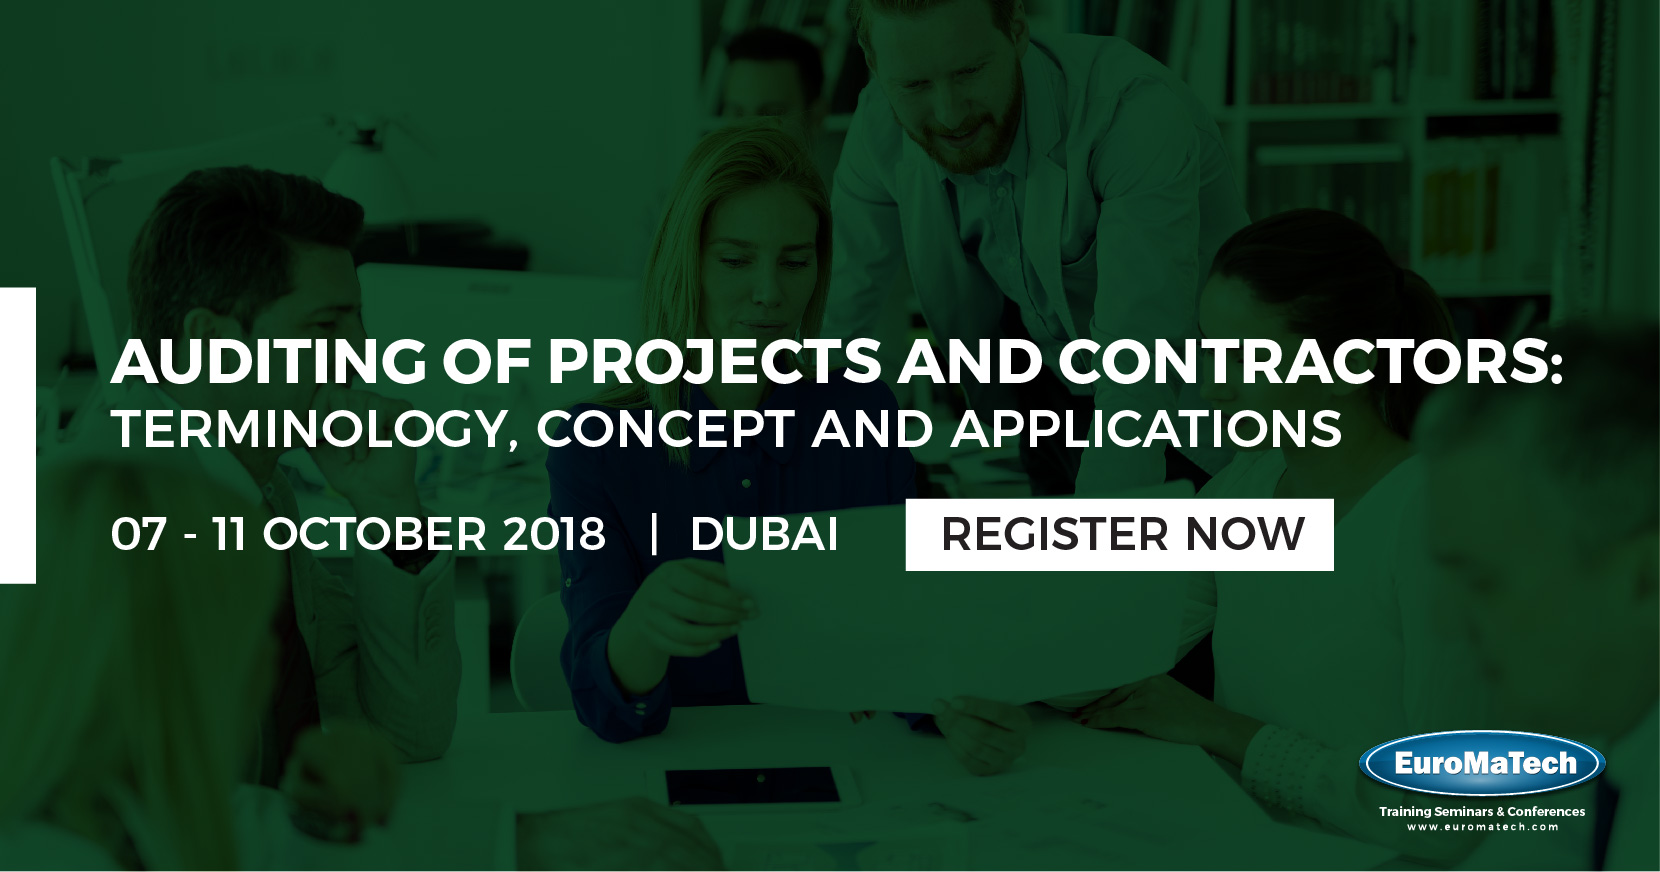 Auditing of Projects and Contractors Training Course in Dubai